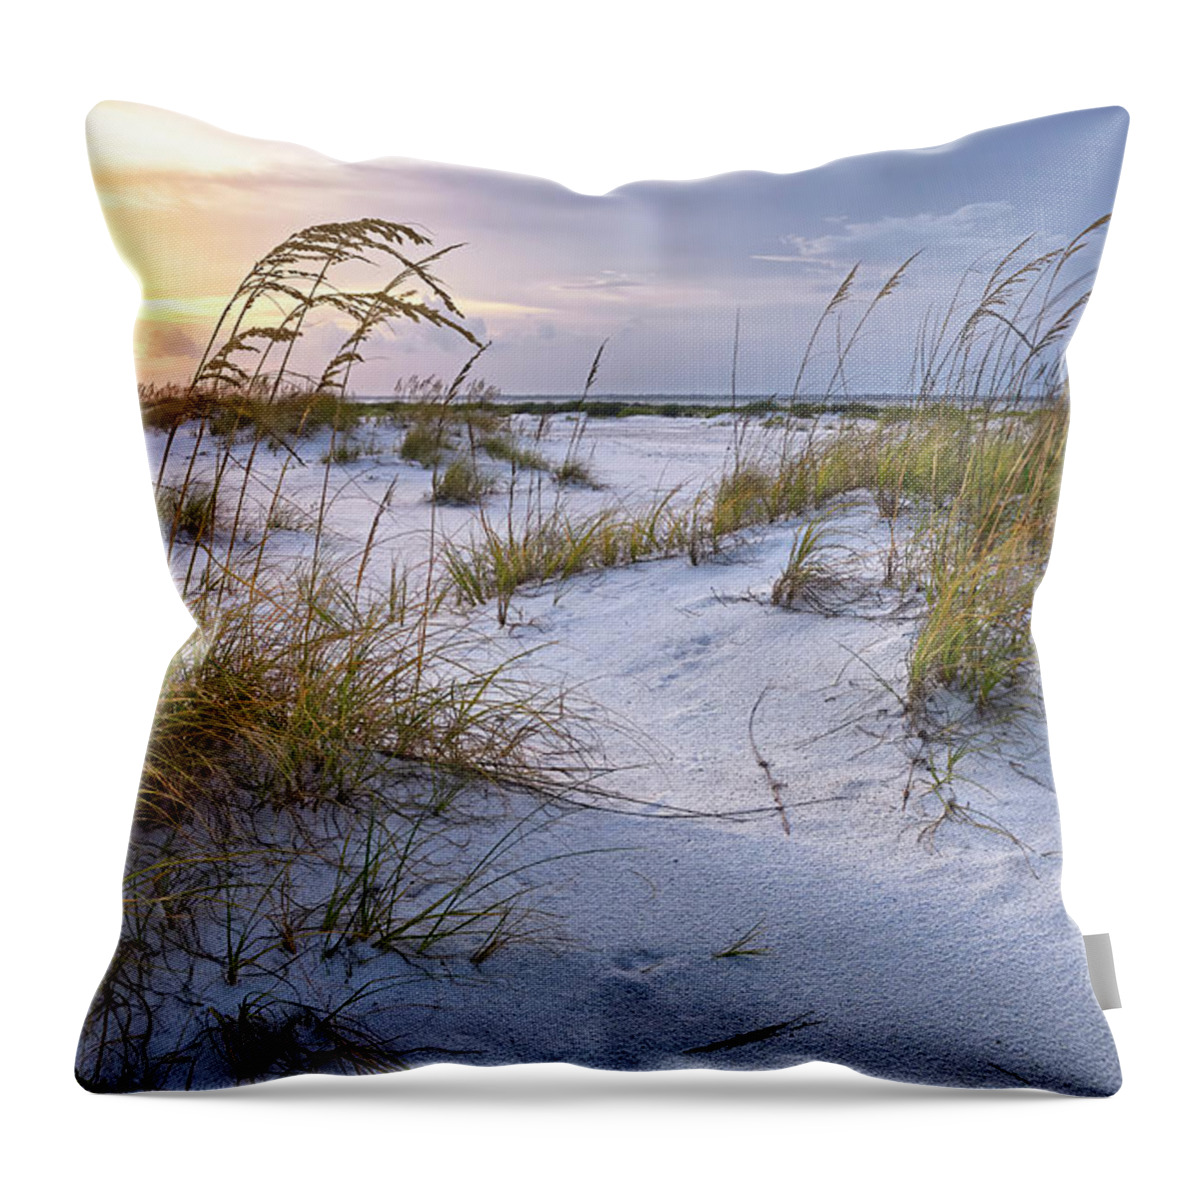 Pensacola Fl Throw Pillow featuring the photograph Warm Sunset by Bill Chambers